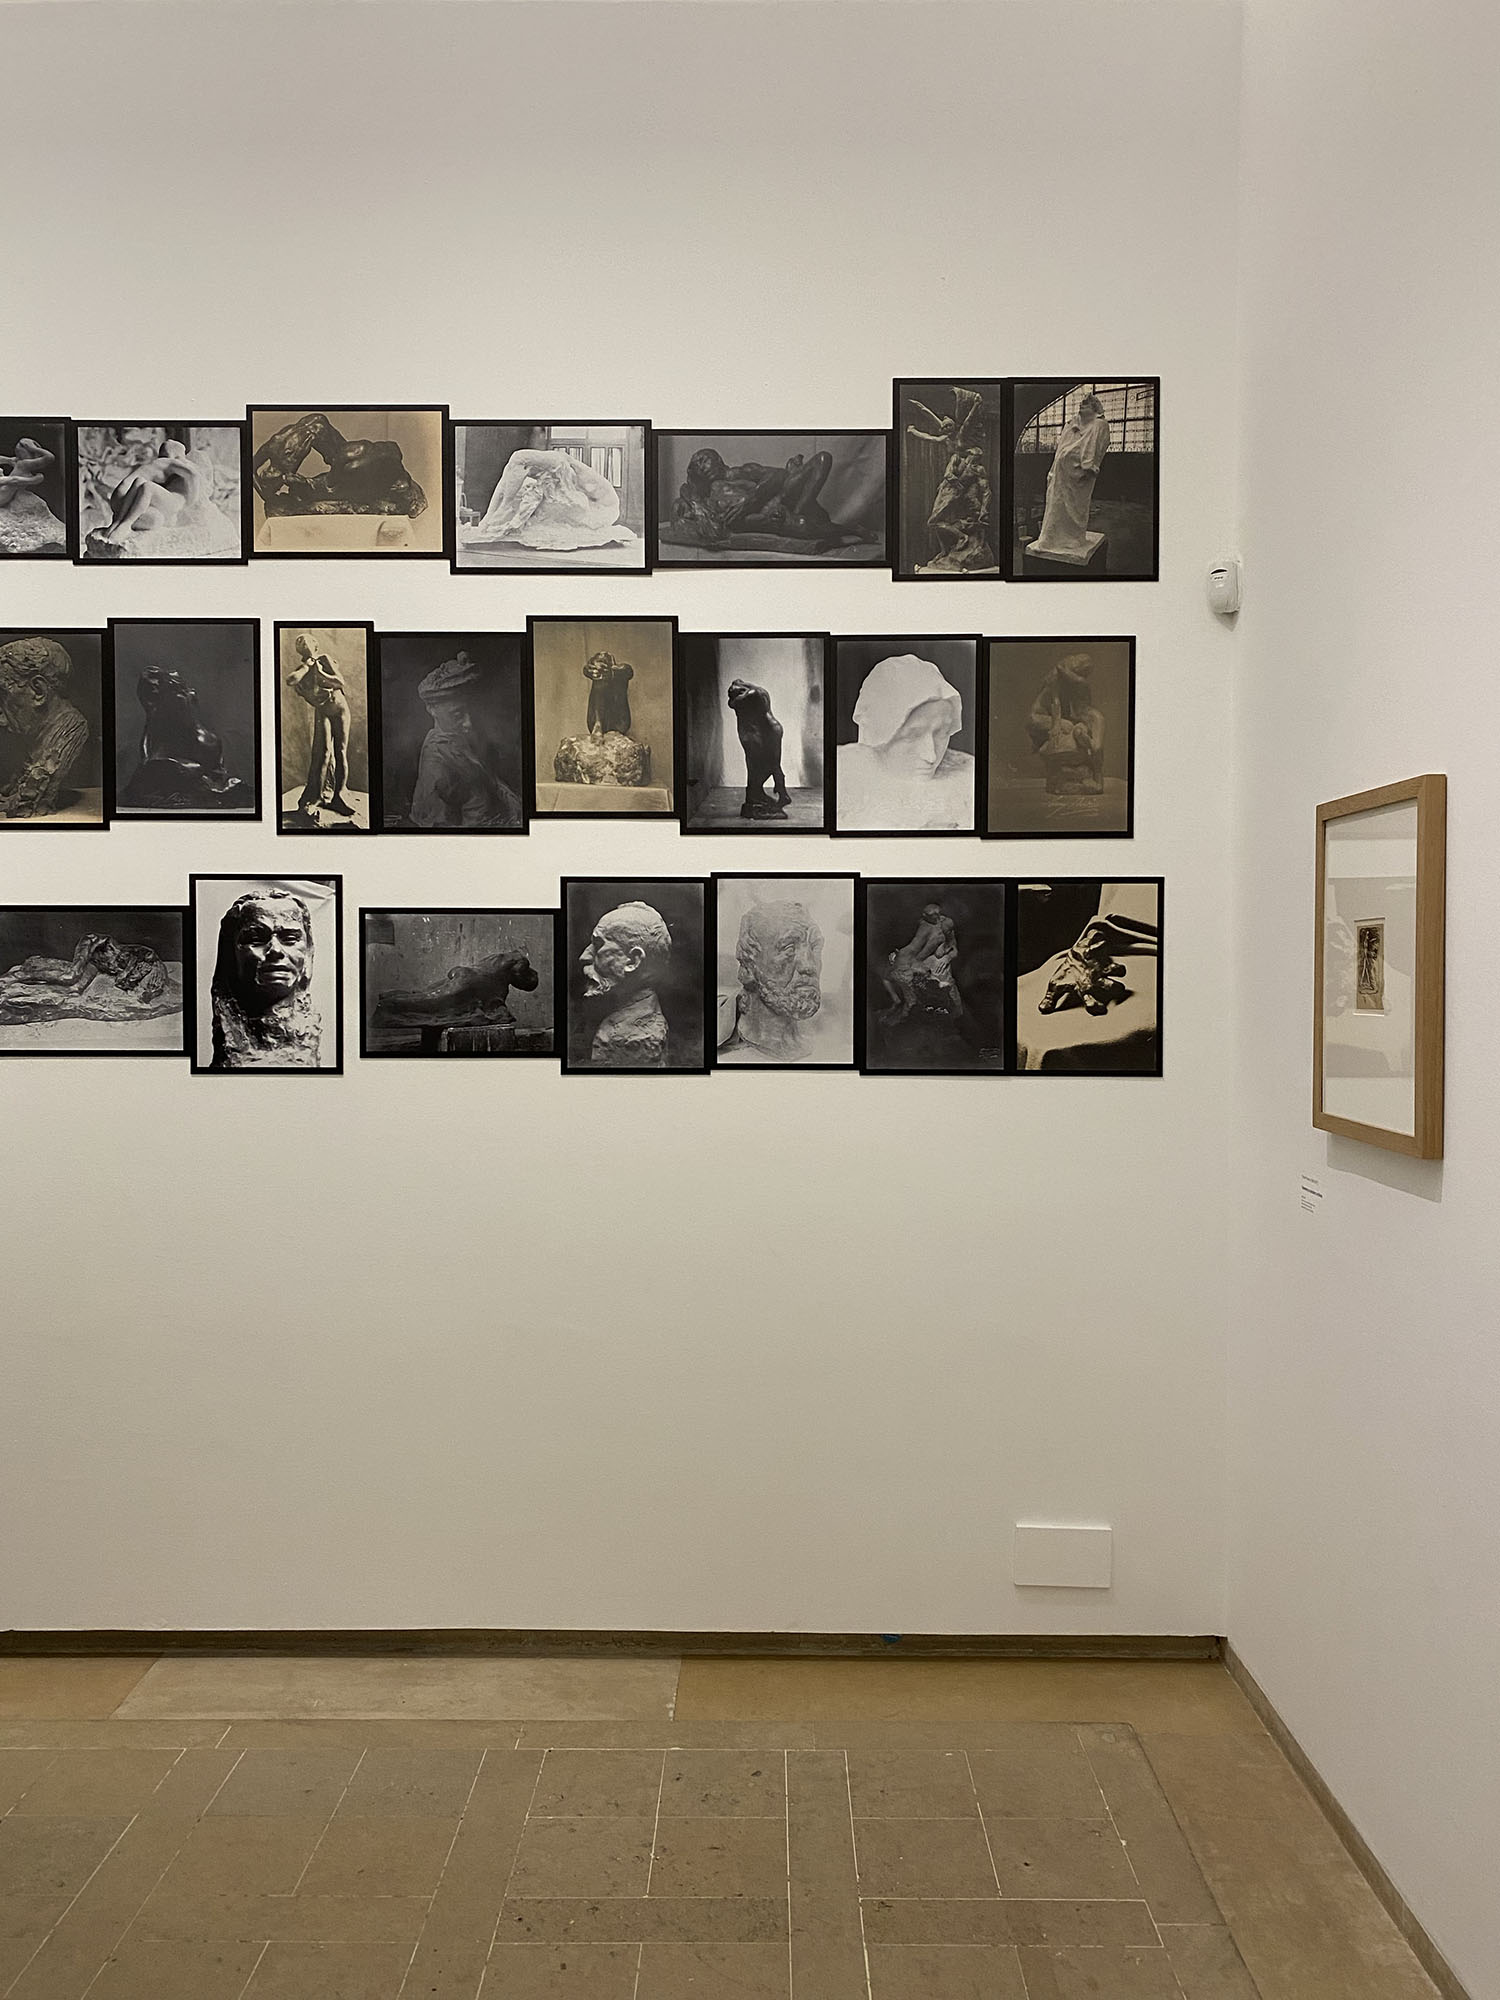 Coco & Vera - Photographs at Musee Picasso in Paris